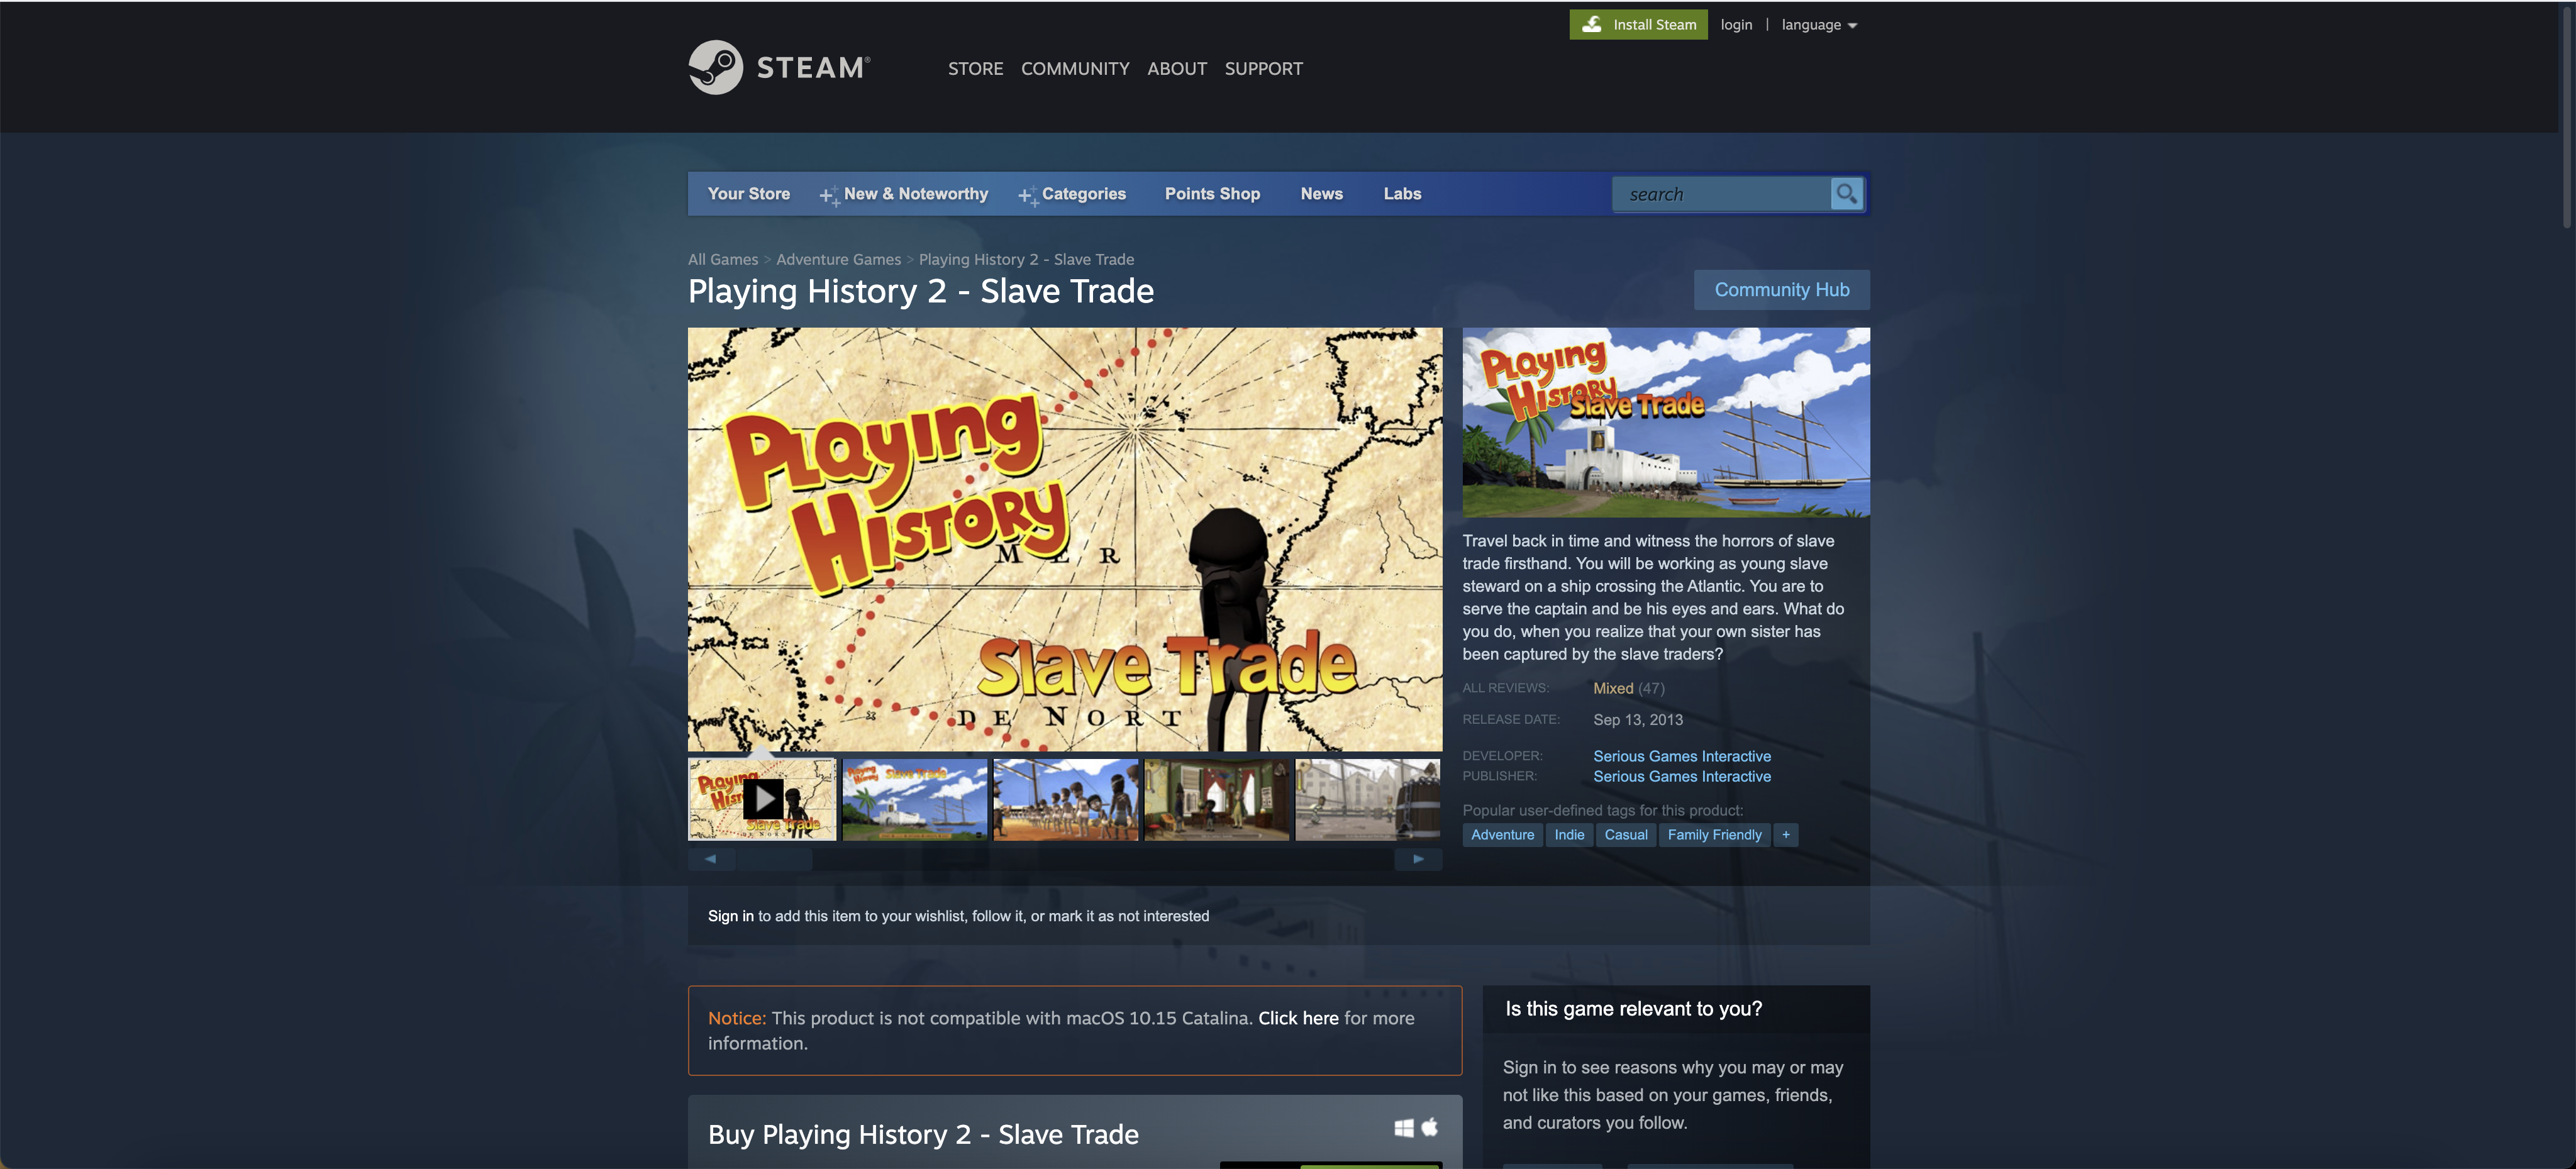 0a0ee5a25d08a821fbe5bca70c358399” in “Playing History 2: Slave Trade” on  Manifold @CUNY